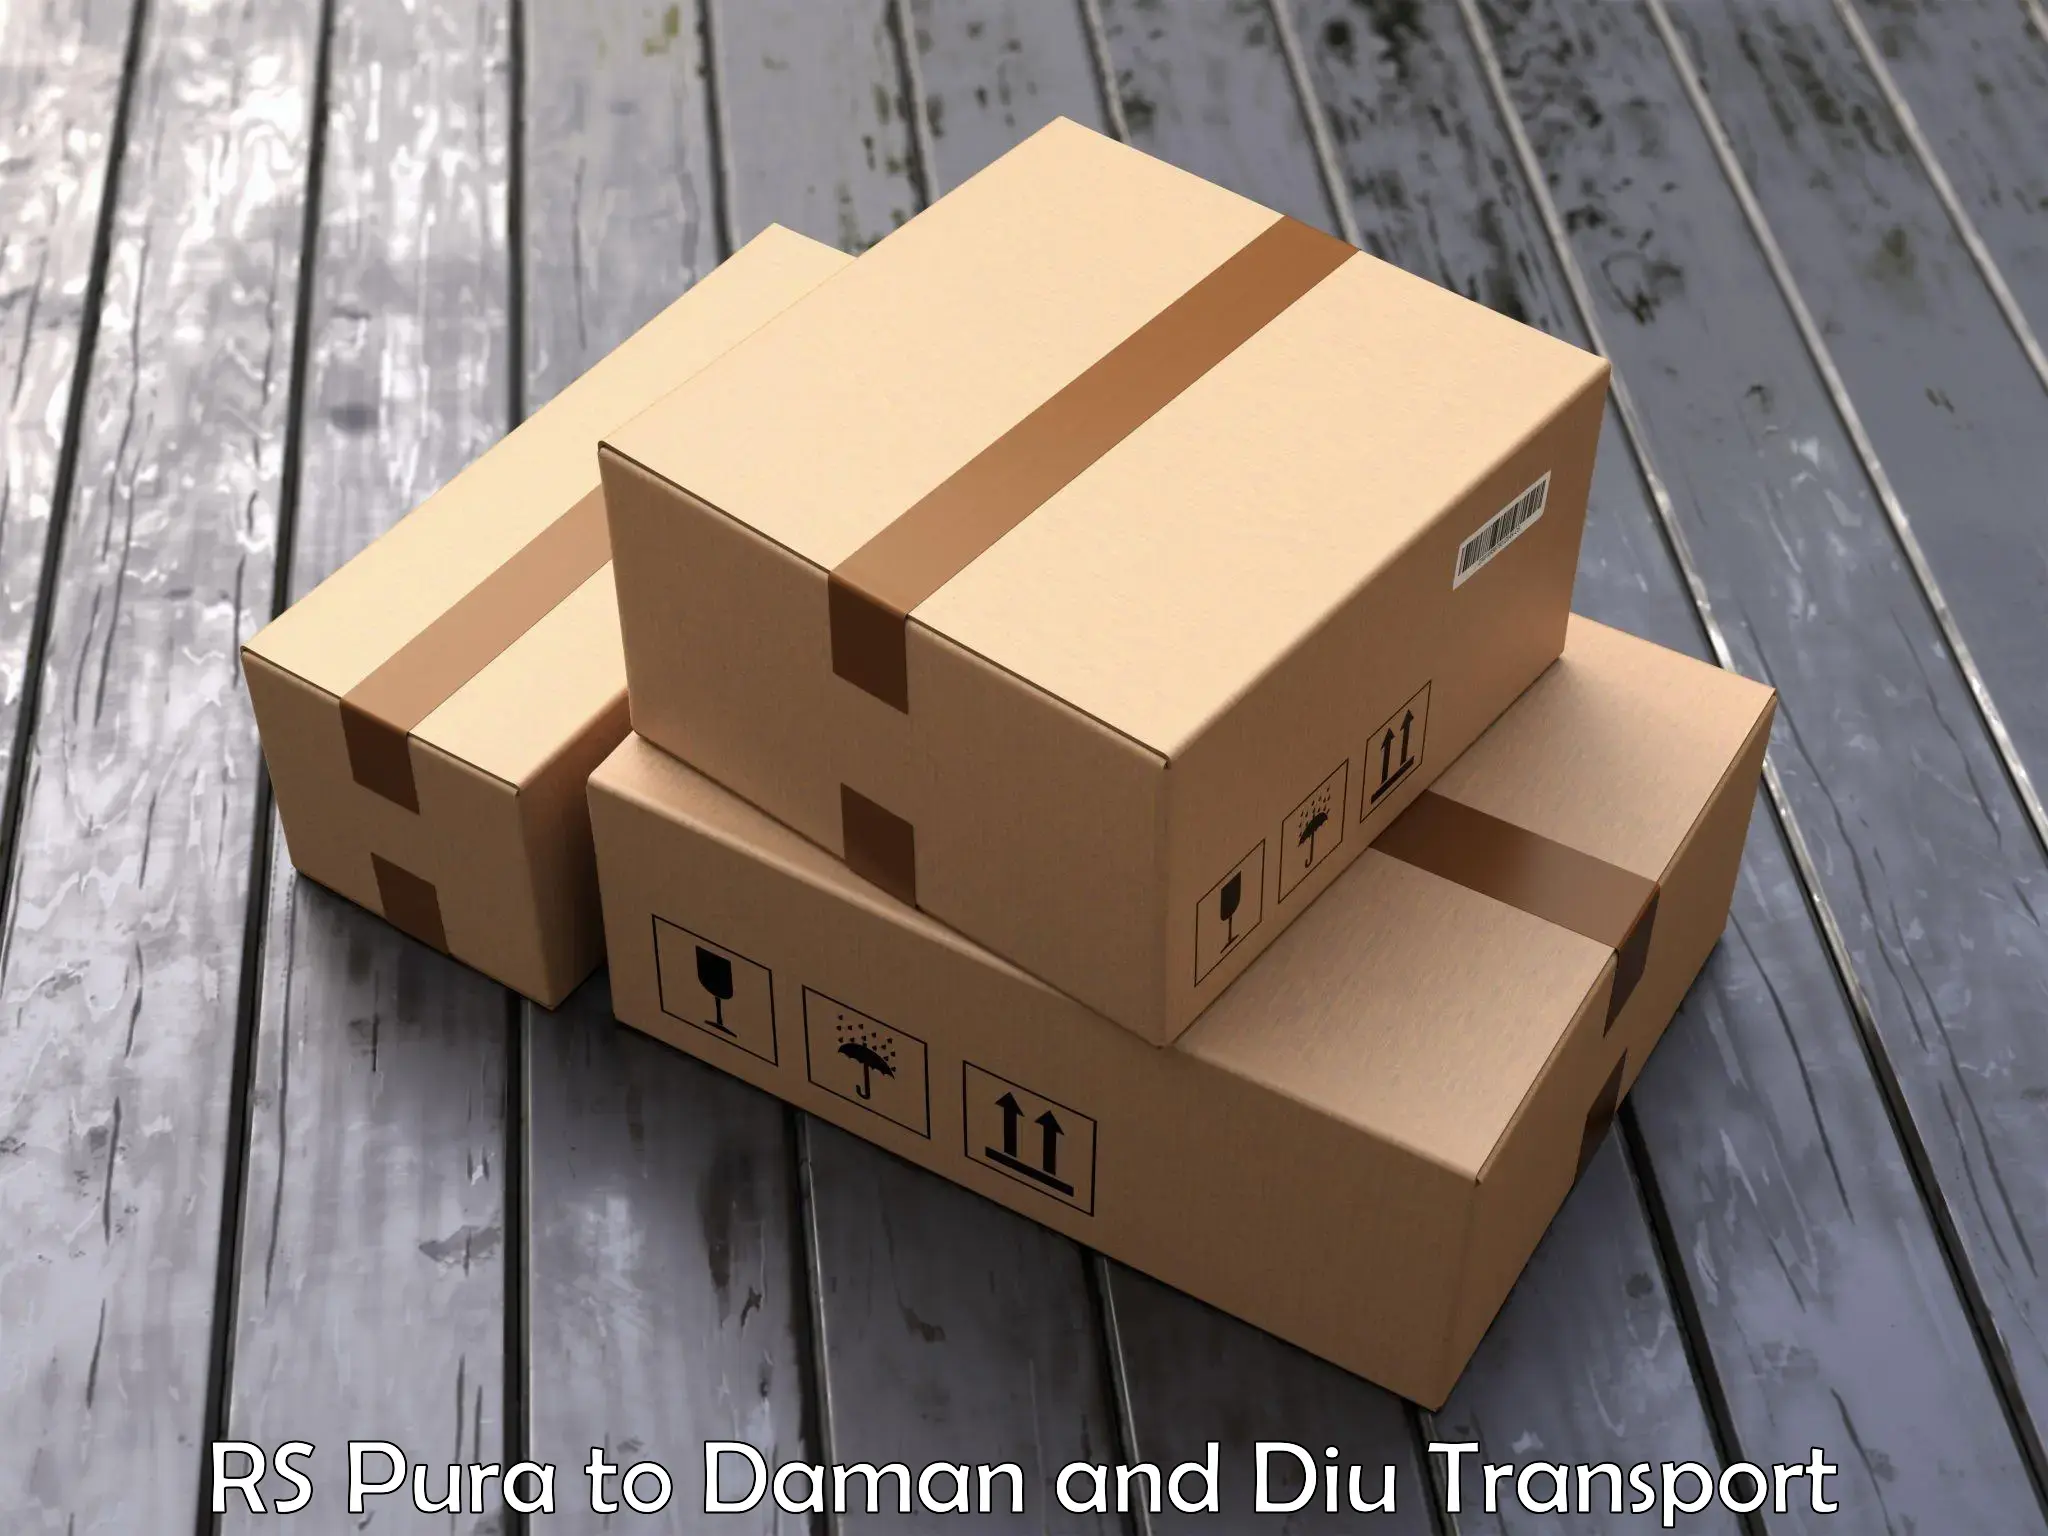 Two wheeler parcel service RS Pura to Daman and Diu